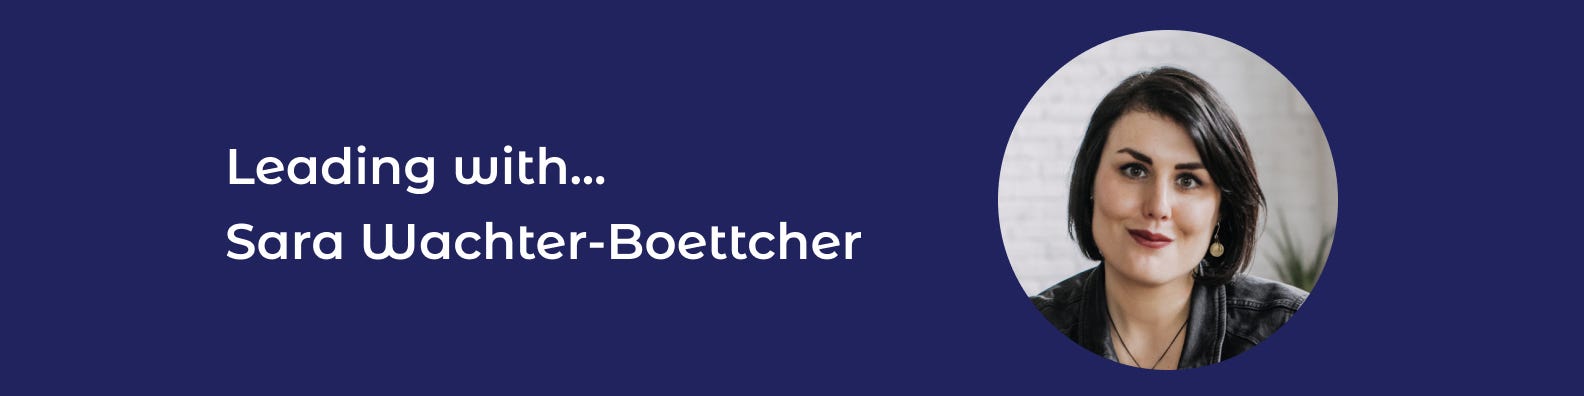 Navy banner with white writing saying Leading with Sara Wachter-Boettcher and a headshot